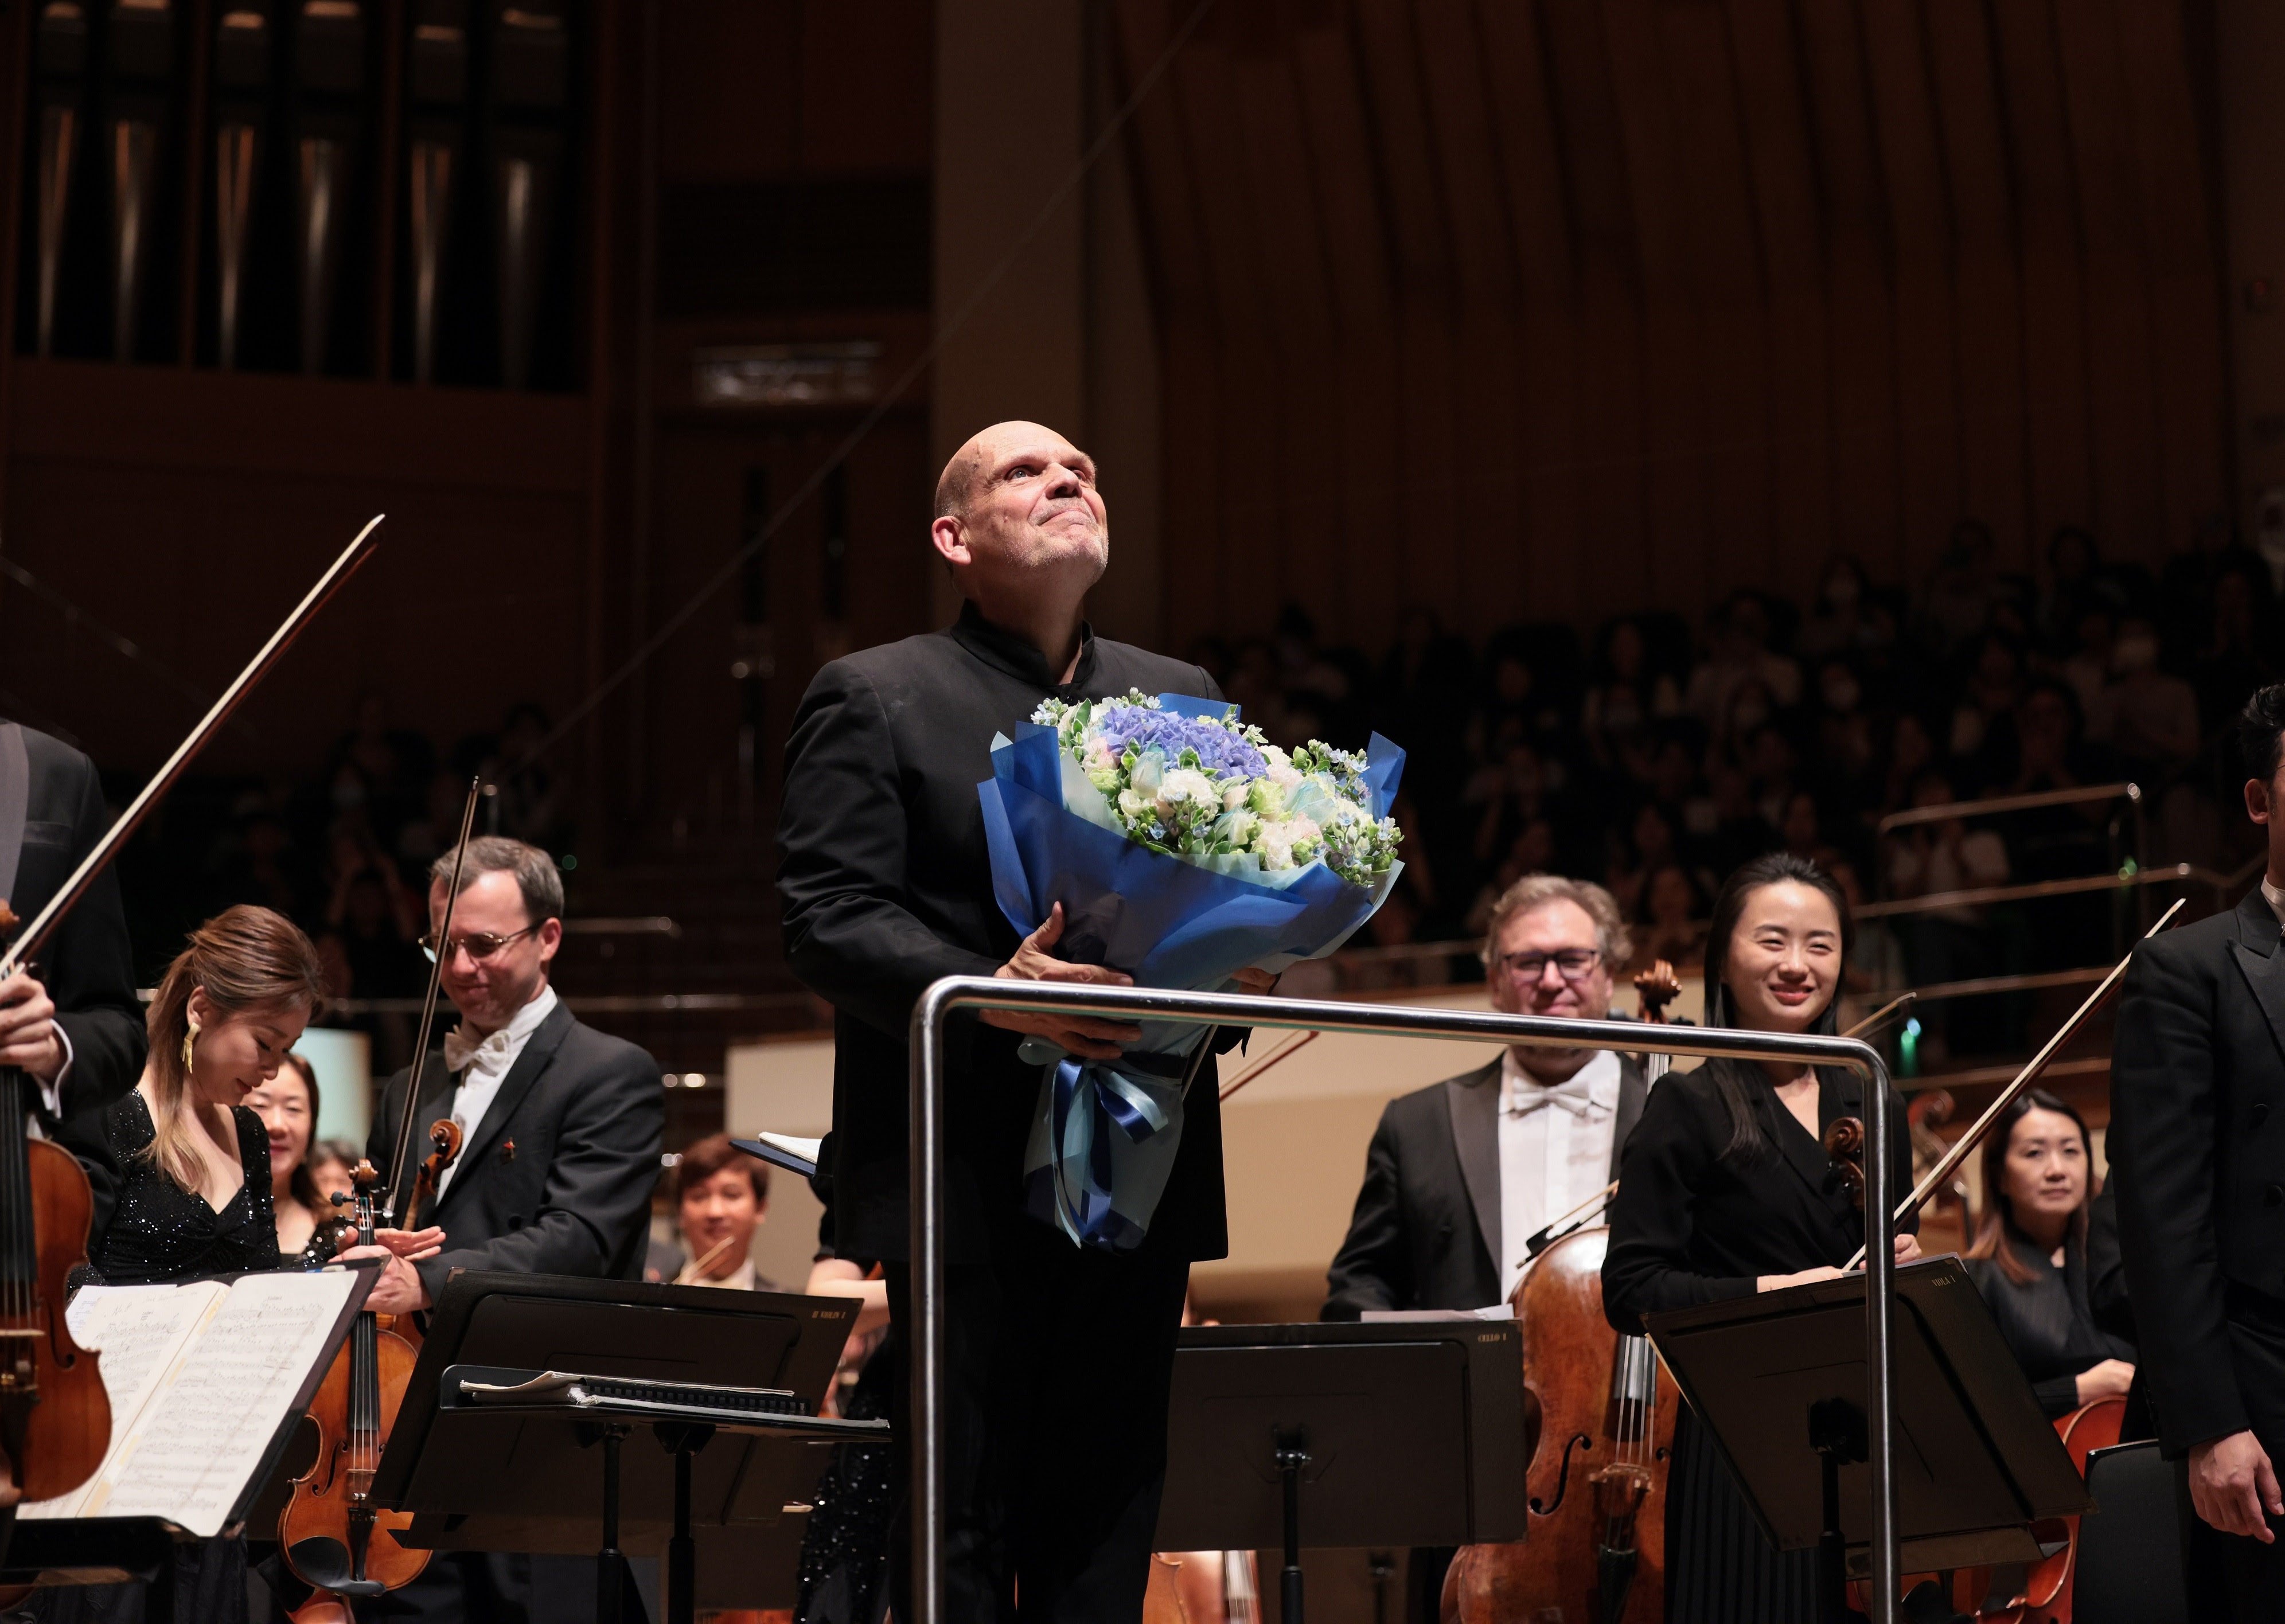 Jaap van Zweden and the Hong Kong Philharmonic Orchestra receive the applause of the audience at the end of his farewell concert on June 25, 2024. The Dutchman has stepped down as music director after 12 years. Photo: Keith Hiro/HK Phil